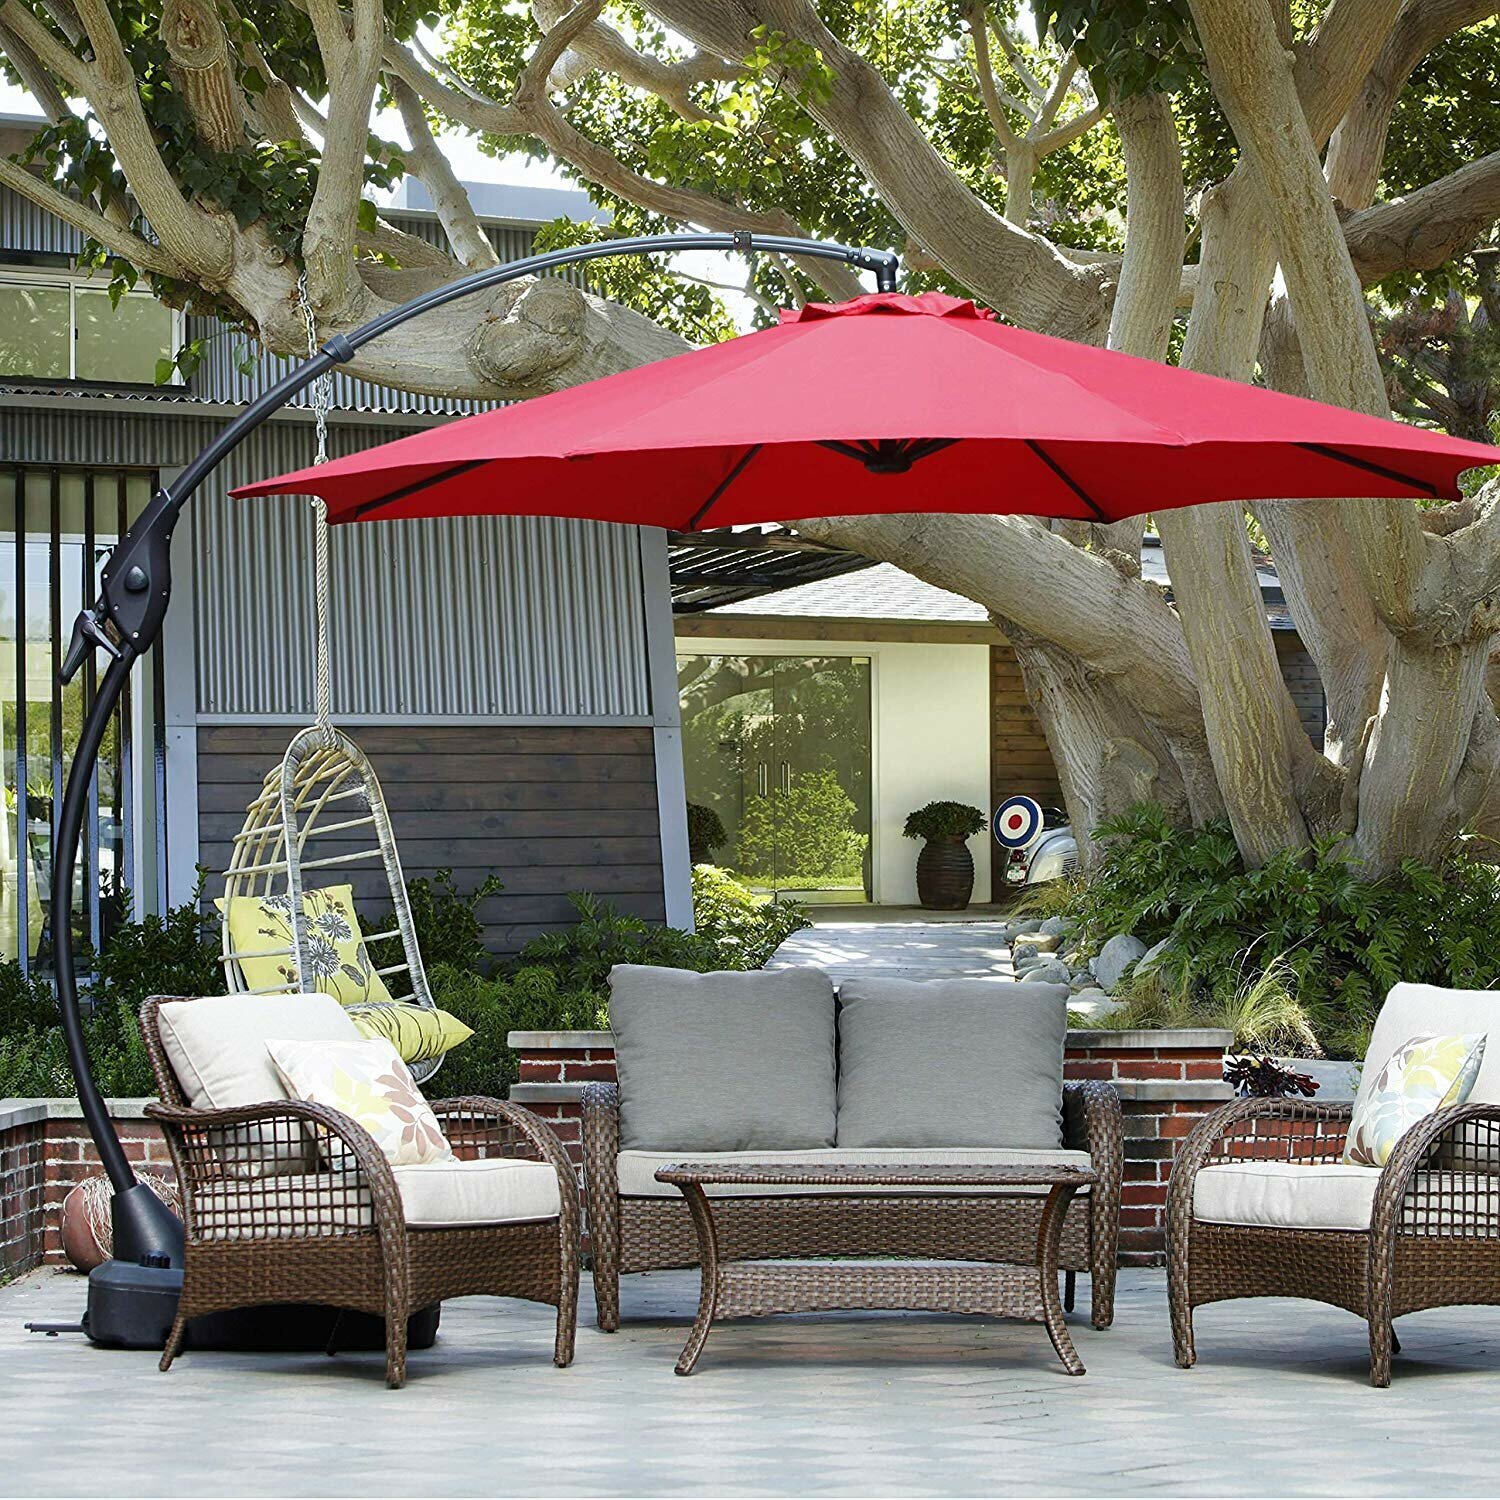 Secures Pool Umbrellas In High Winds. The POOL UMBRELLA CLAMP 